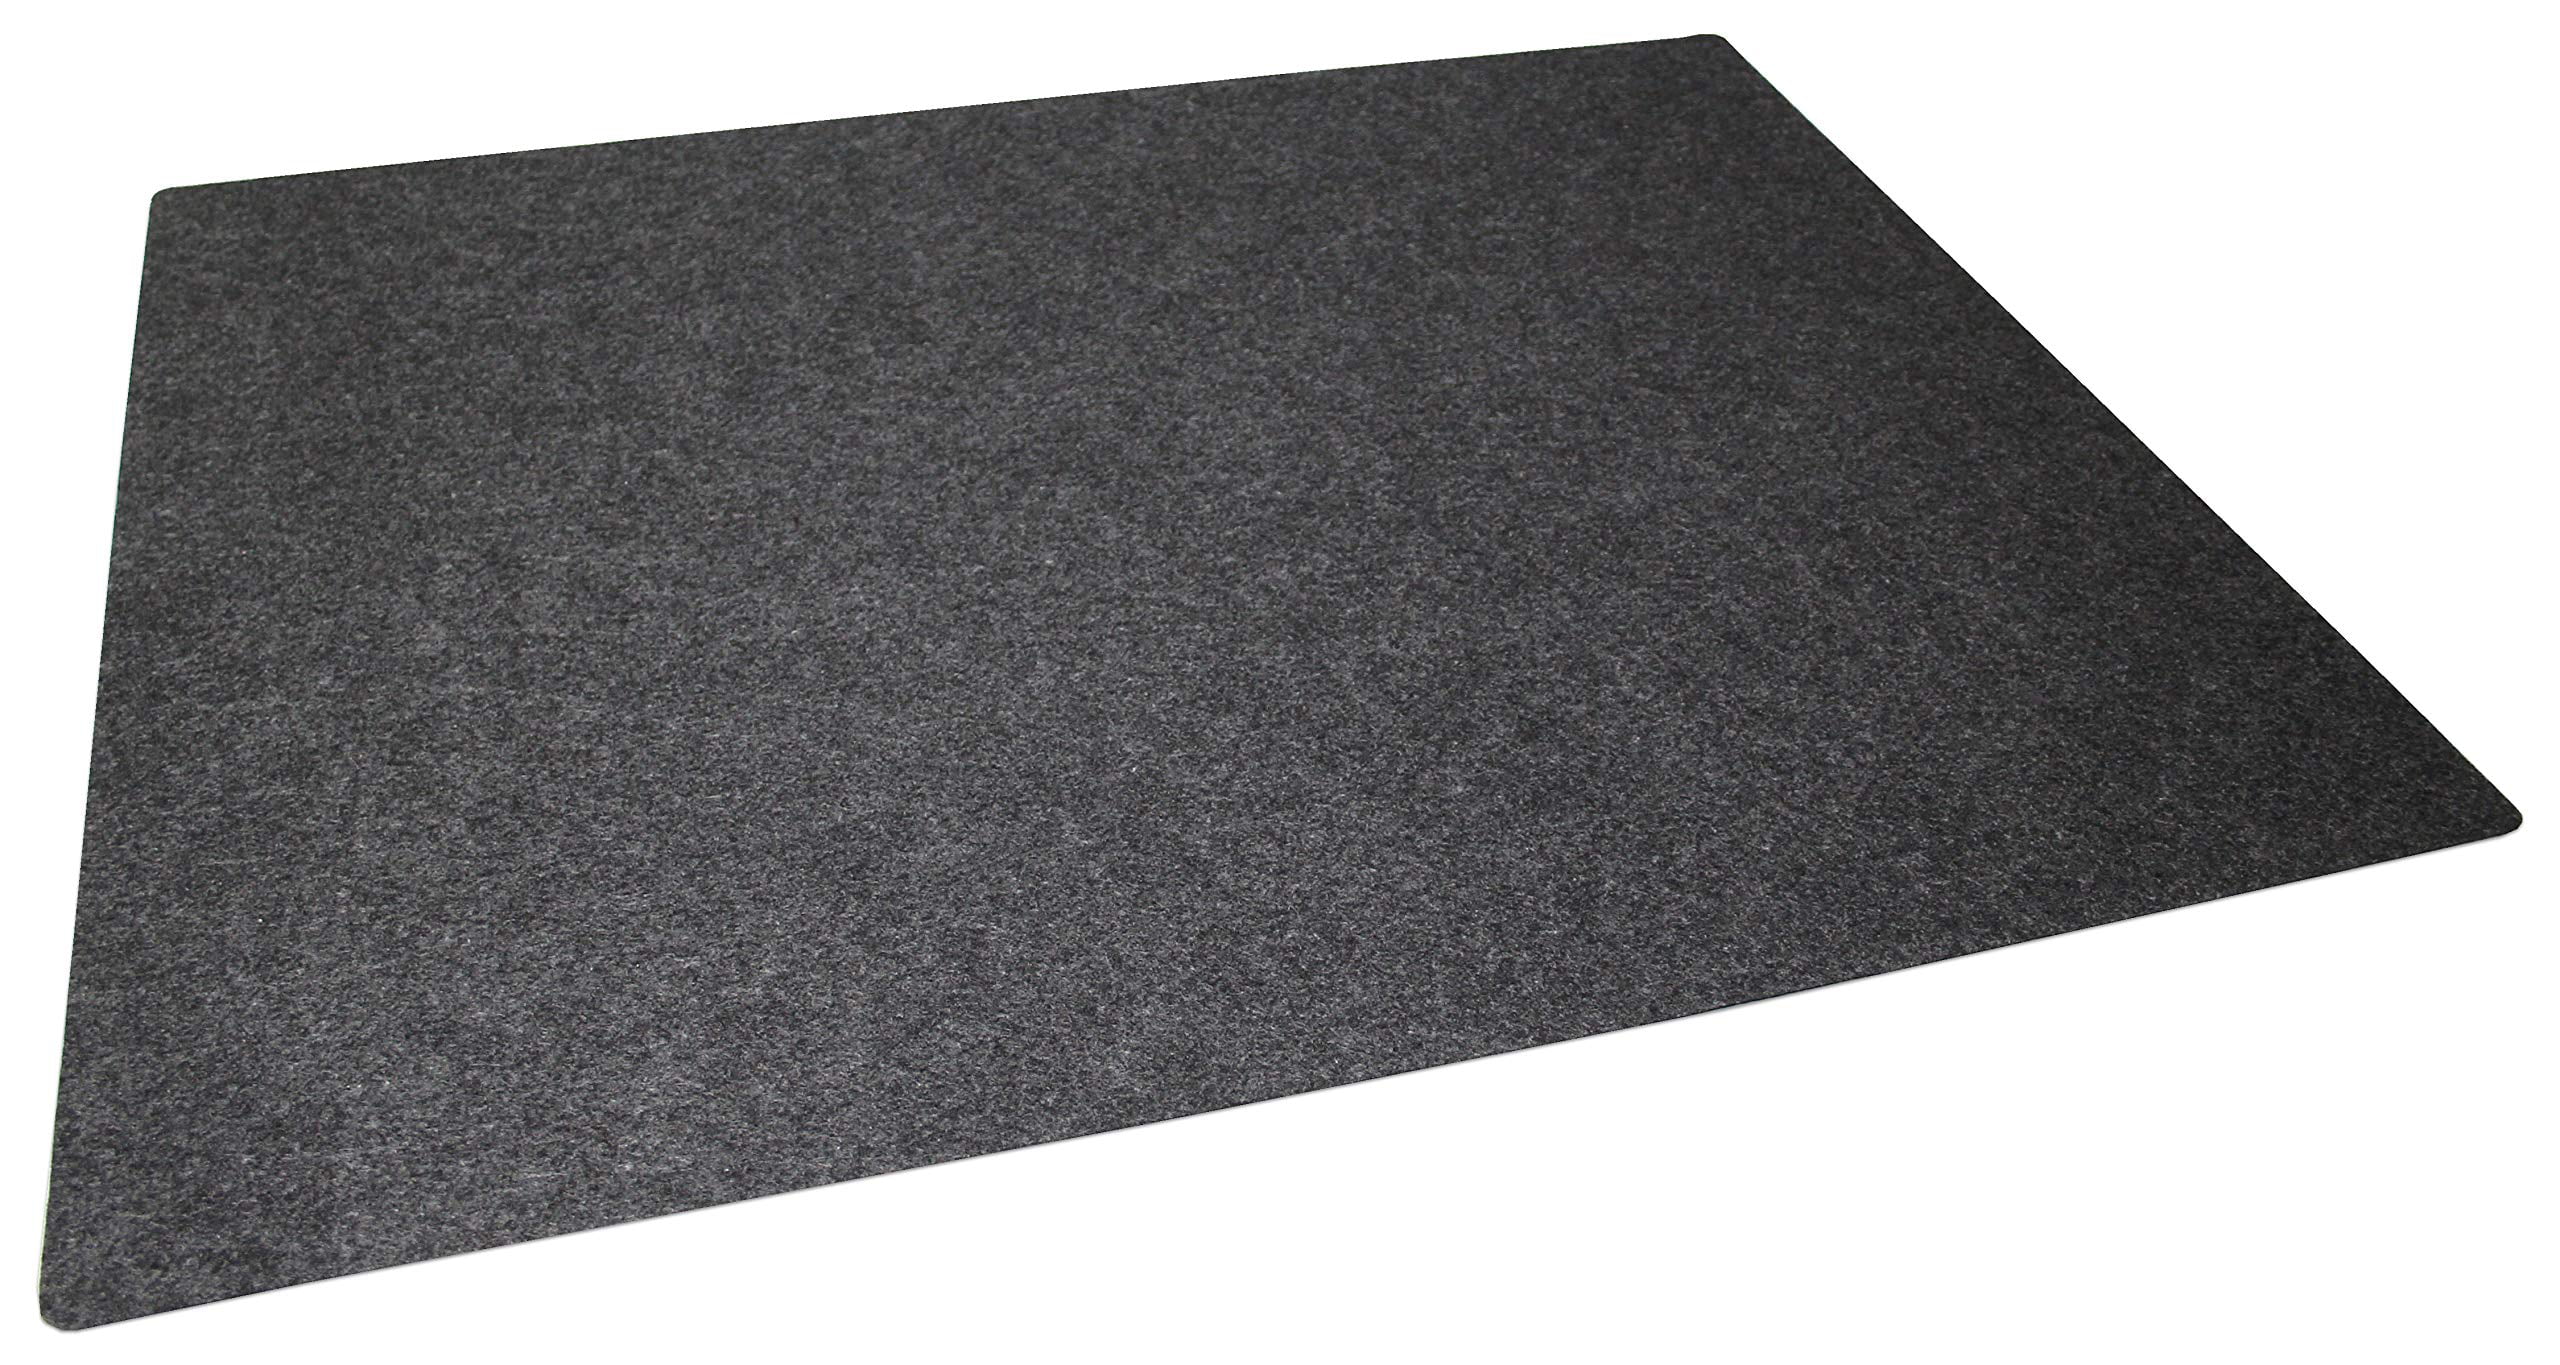 ITSOFT Large 8.5 x 6.6 ft - Oil Absorbent Garage Floor Mat and Mechanic Pad - Protects Floor from Spills, Drips, Splashes and Stains | Washable, Cut